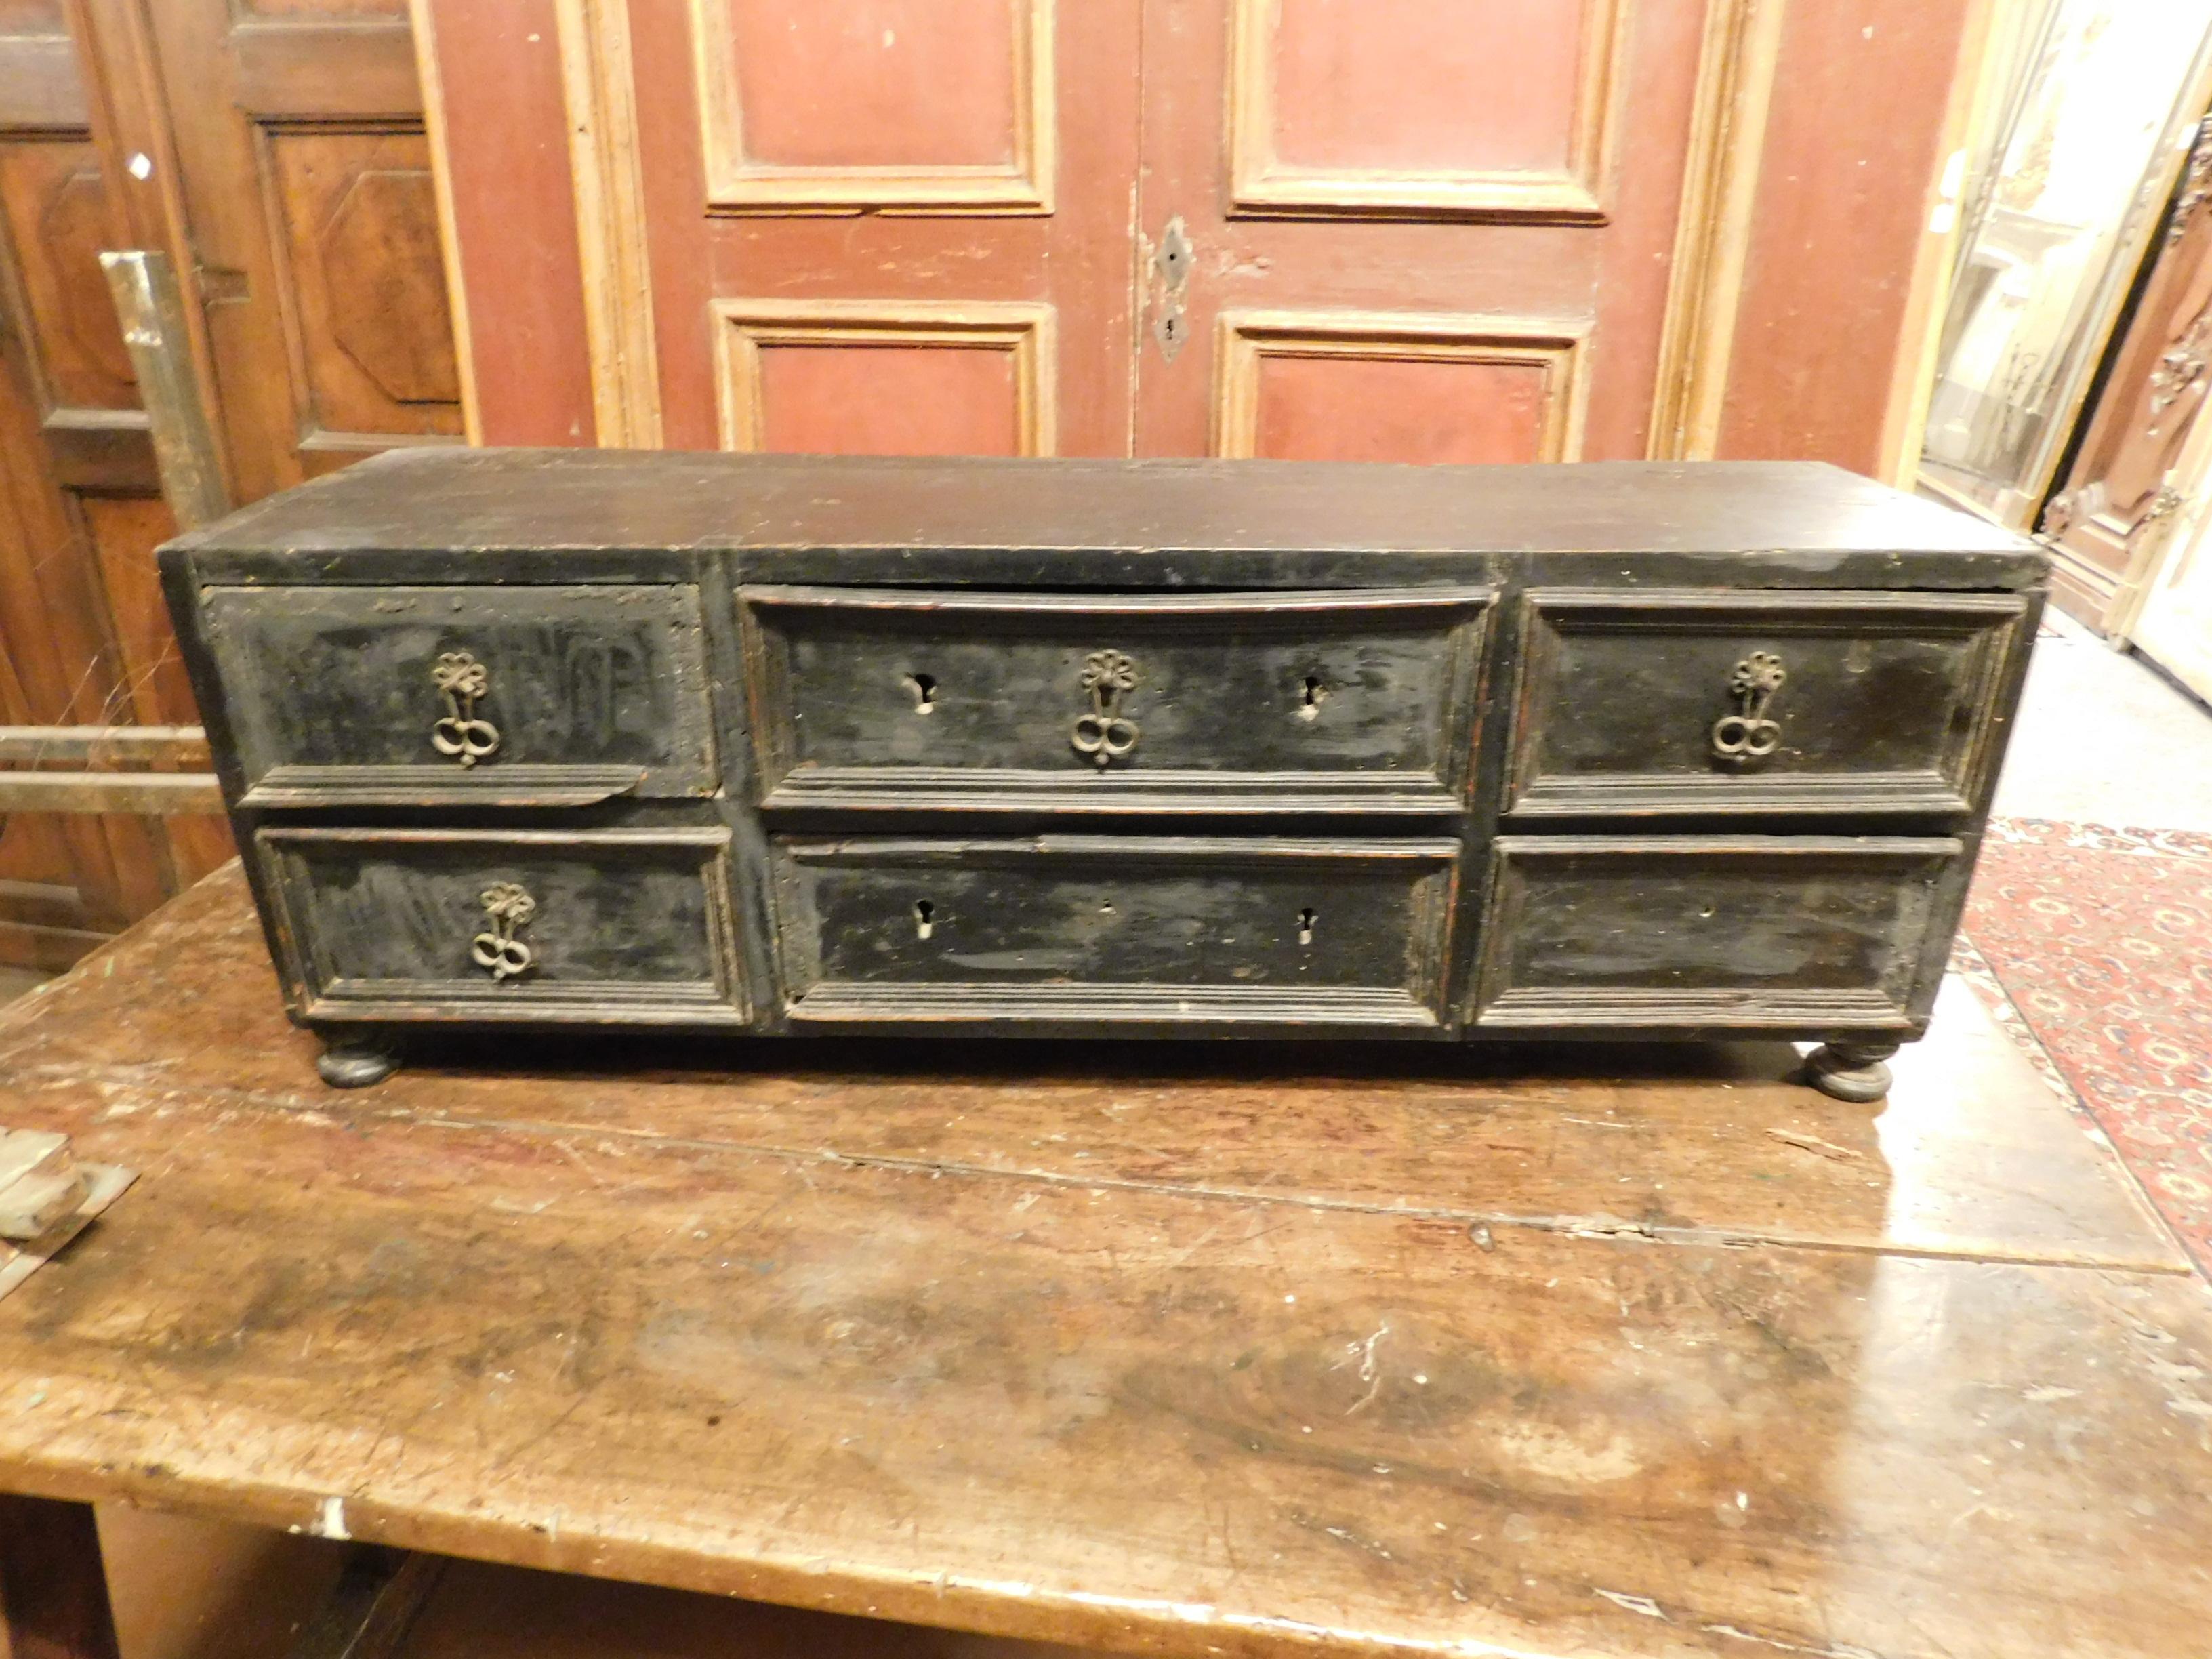 18th century antique cabinet, used as a money box before the electric coffers, black lacquered wood, slightly to restore,
with working and original drawers, original knobs and feet.
Beautiful object to complete a shop or to store jewels with a